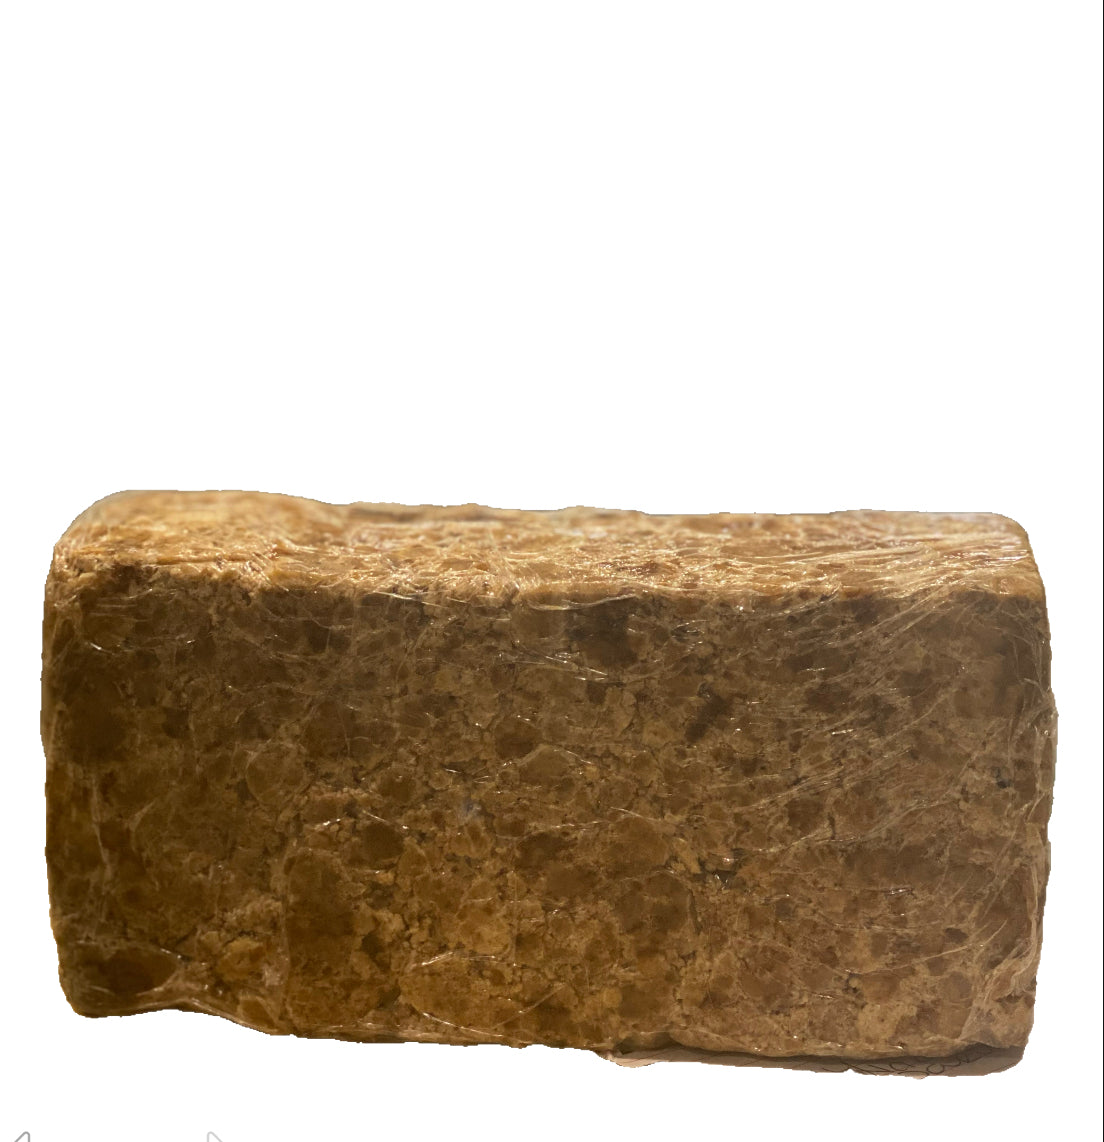 African Black Soap 2lbs